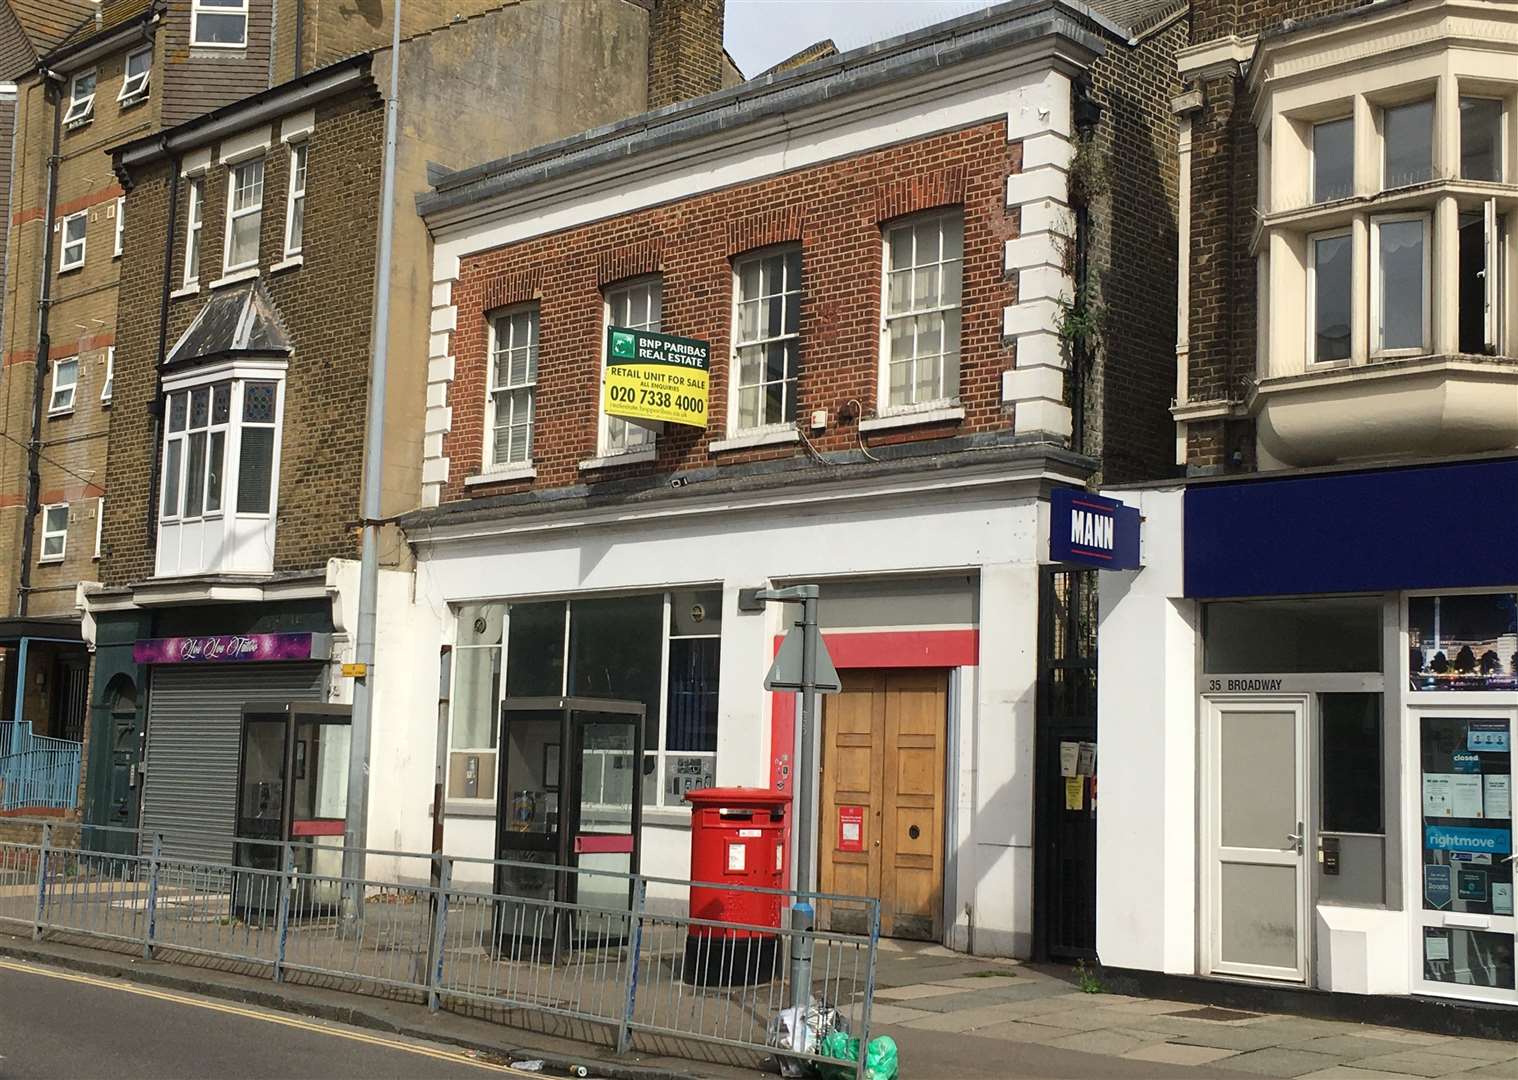 For sale: Sheerness Post Office